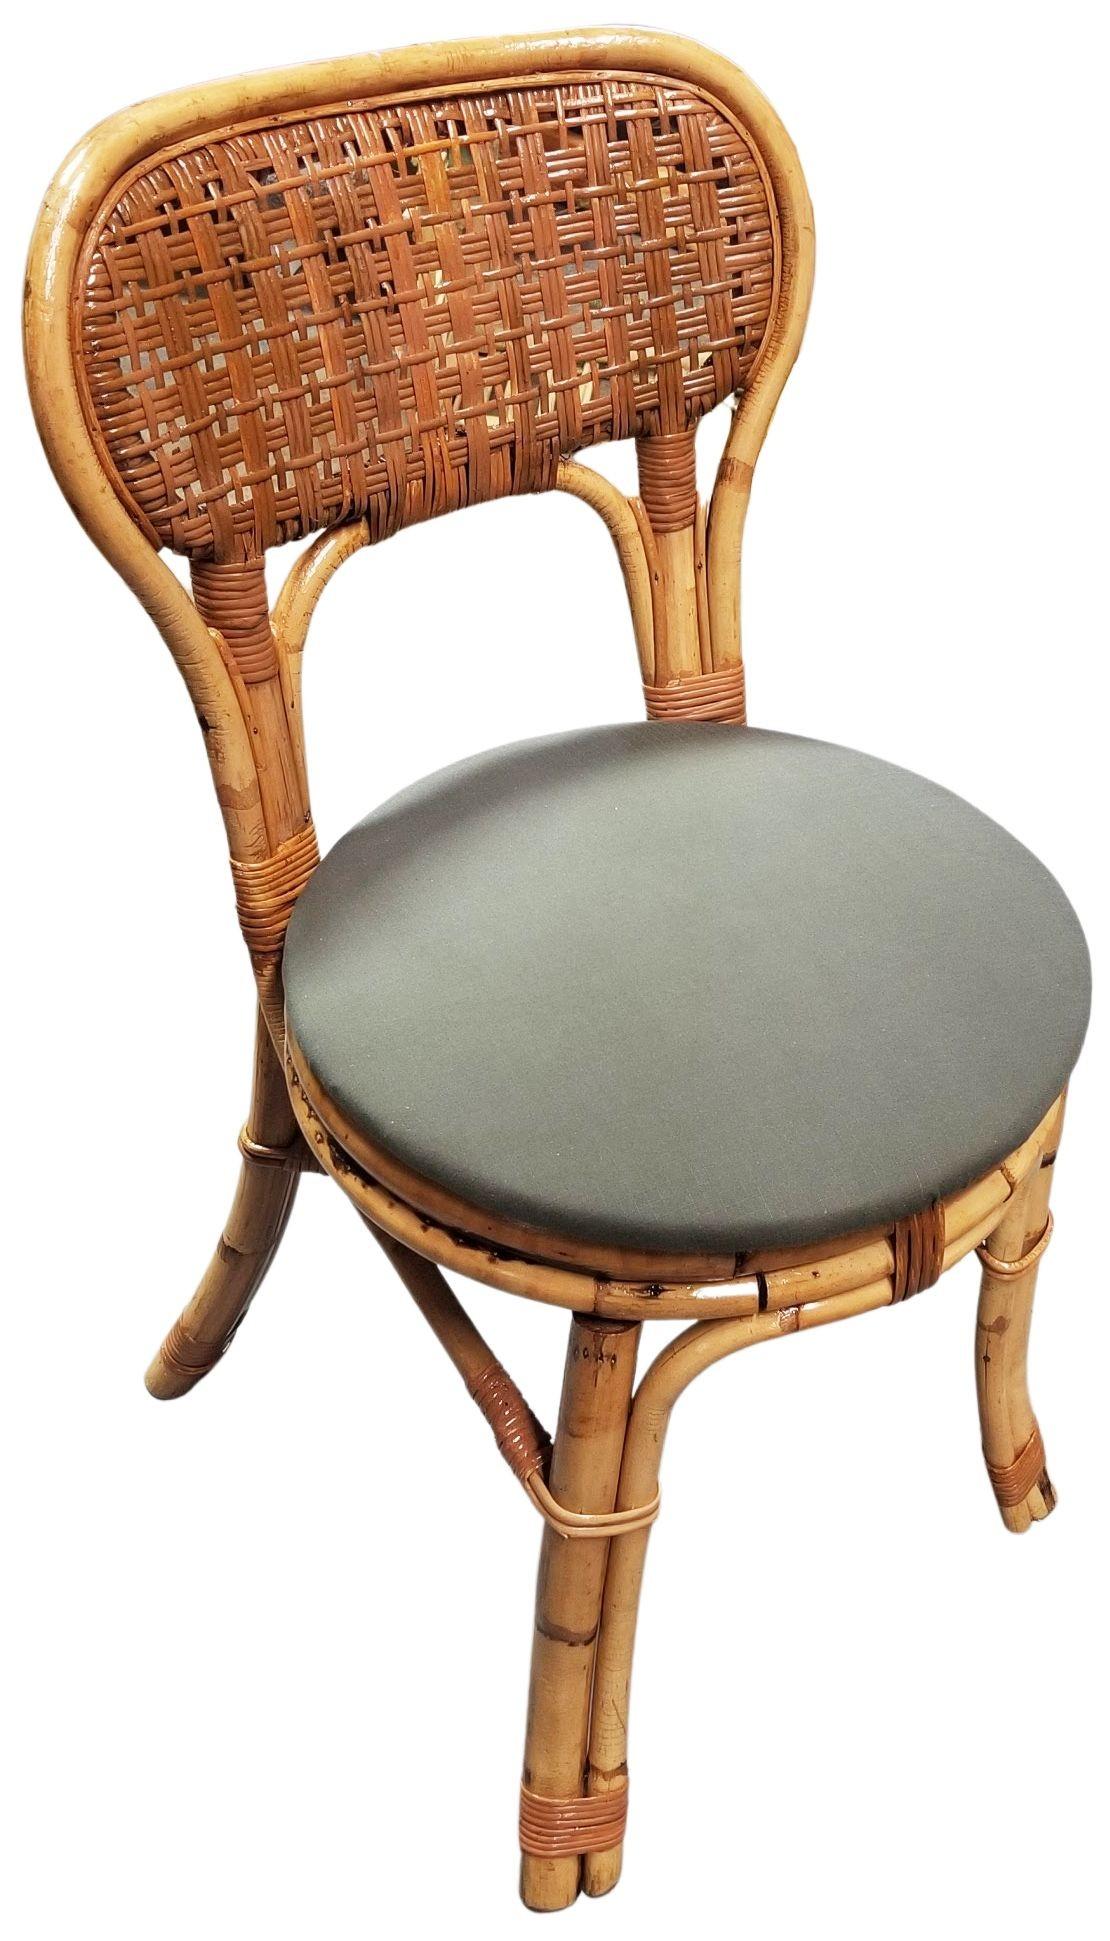 Restored pair of Calif-Asia brand-styled rattan dining chairs with a woven wicker seat back, two-strand legs, wicker wrapped ends and brand new round cushions in sage green.

Calif-Asia was a vintage rattan company based in Los Angeles California